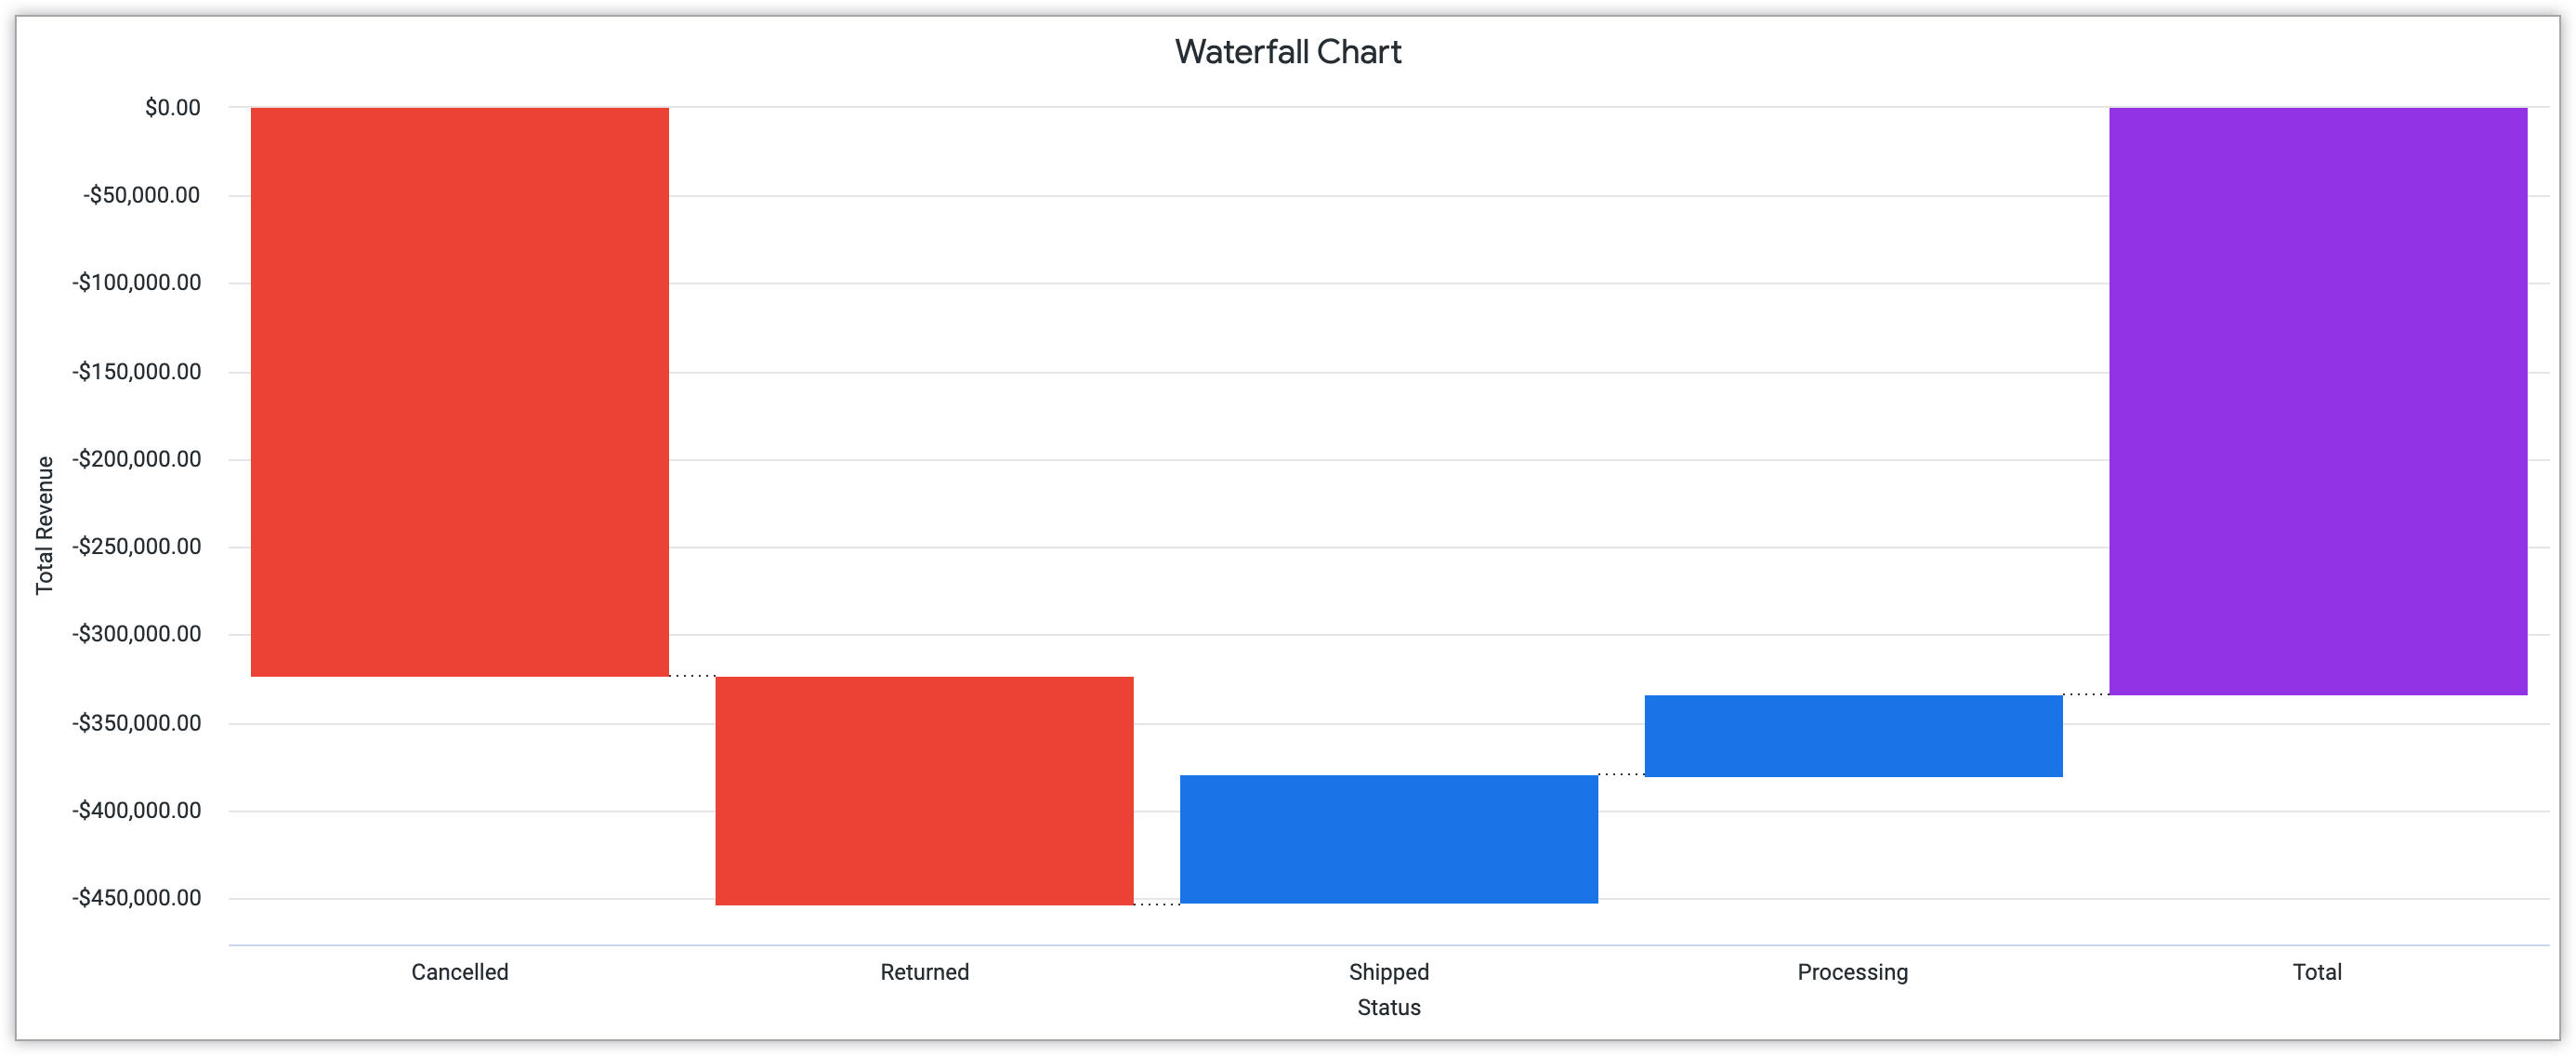 Waterfall chart showing Status on the x-axis and Total Revenue on the y-axis.